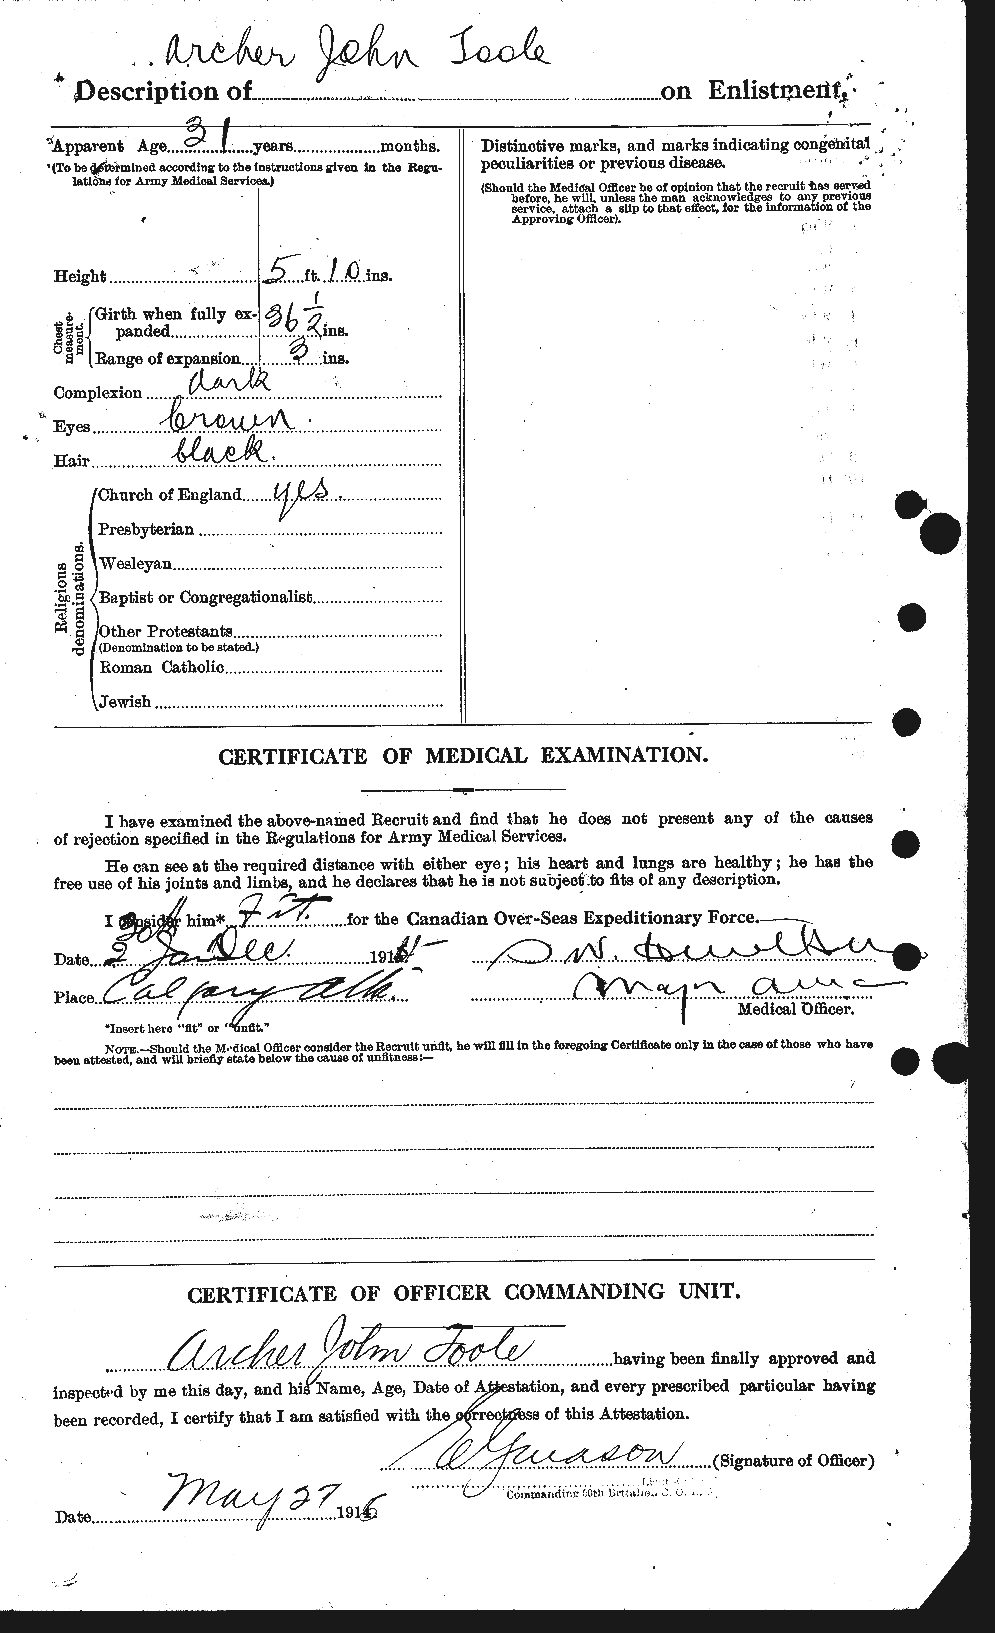 Personnel Records of the First World War - CEF 639698b